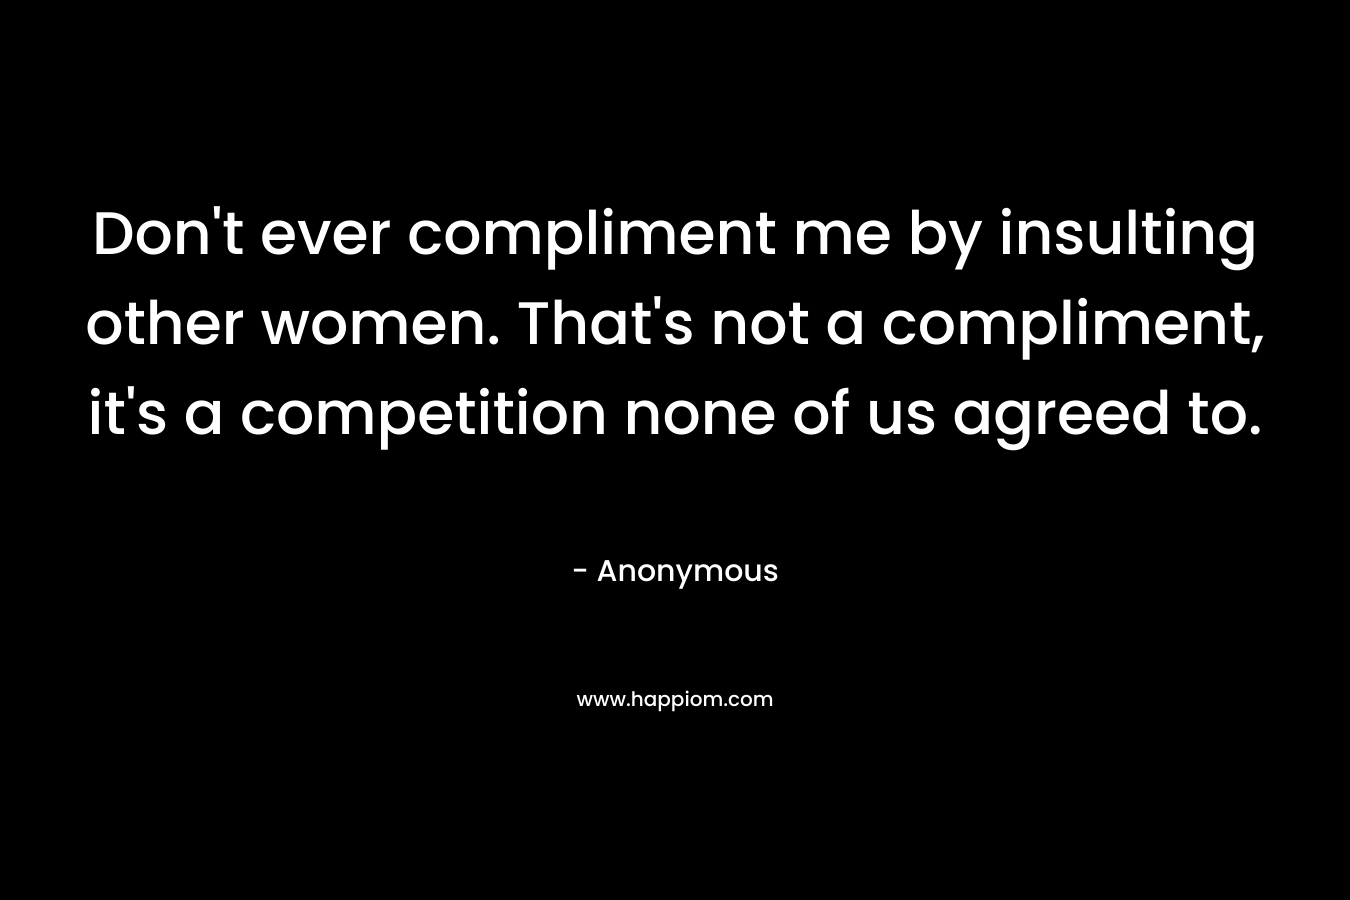 Don’t ever compliment me by insulting other women. That’s not a compliment, it’s a competition none of us agreed to. – Anonymous